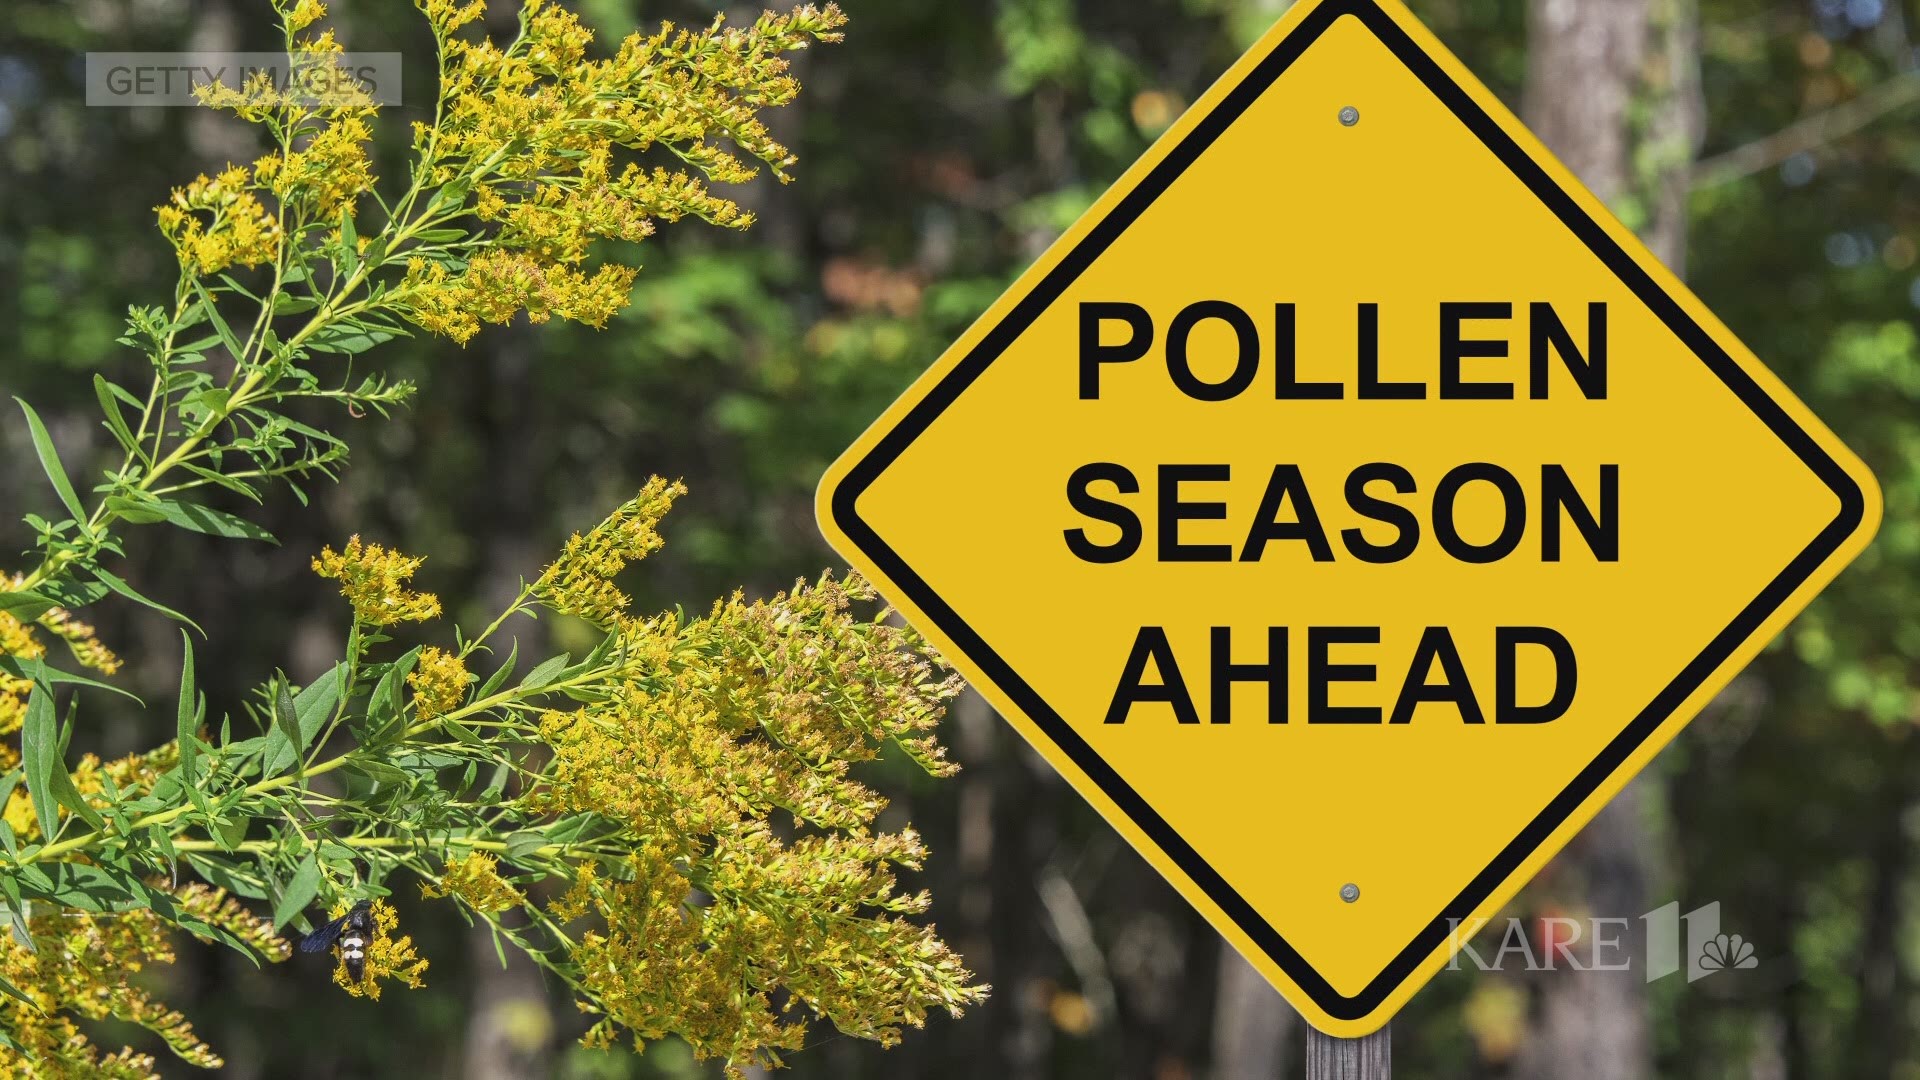 With the return of pleasant weather comes the inevitable allergies. Here's what you can do to fight them off.